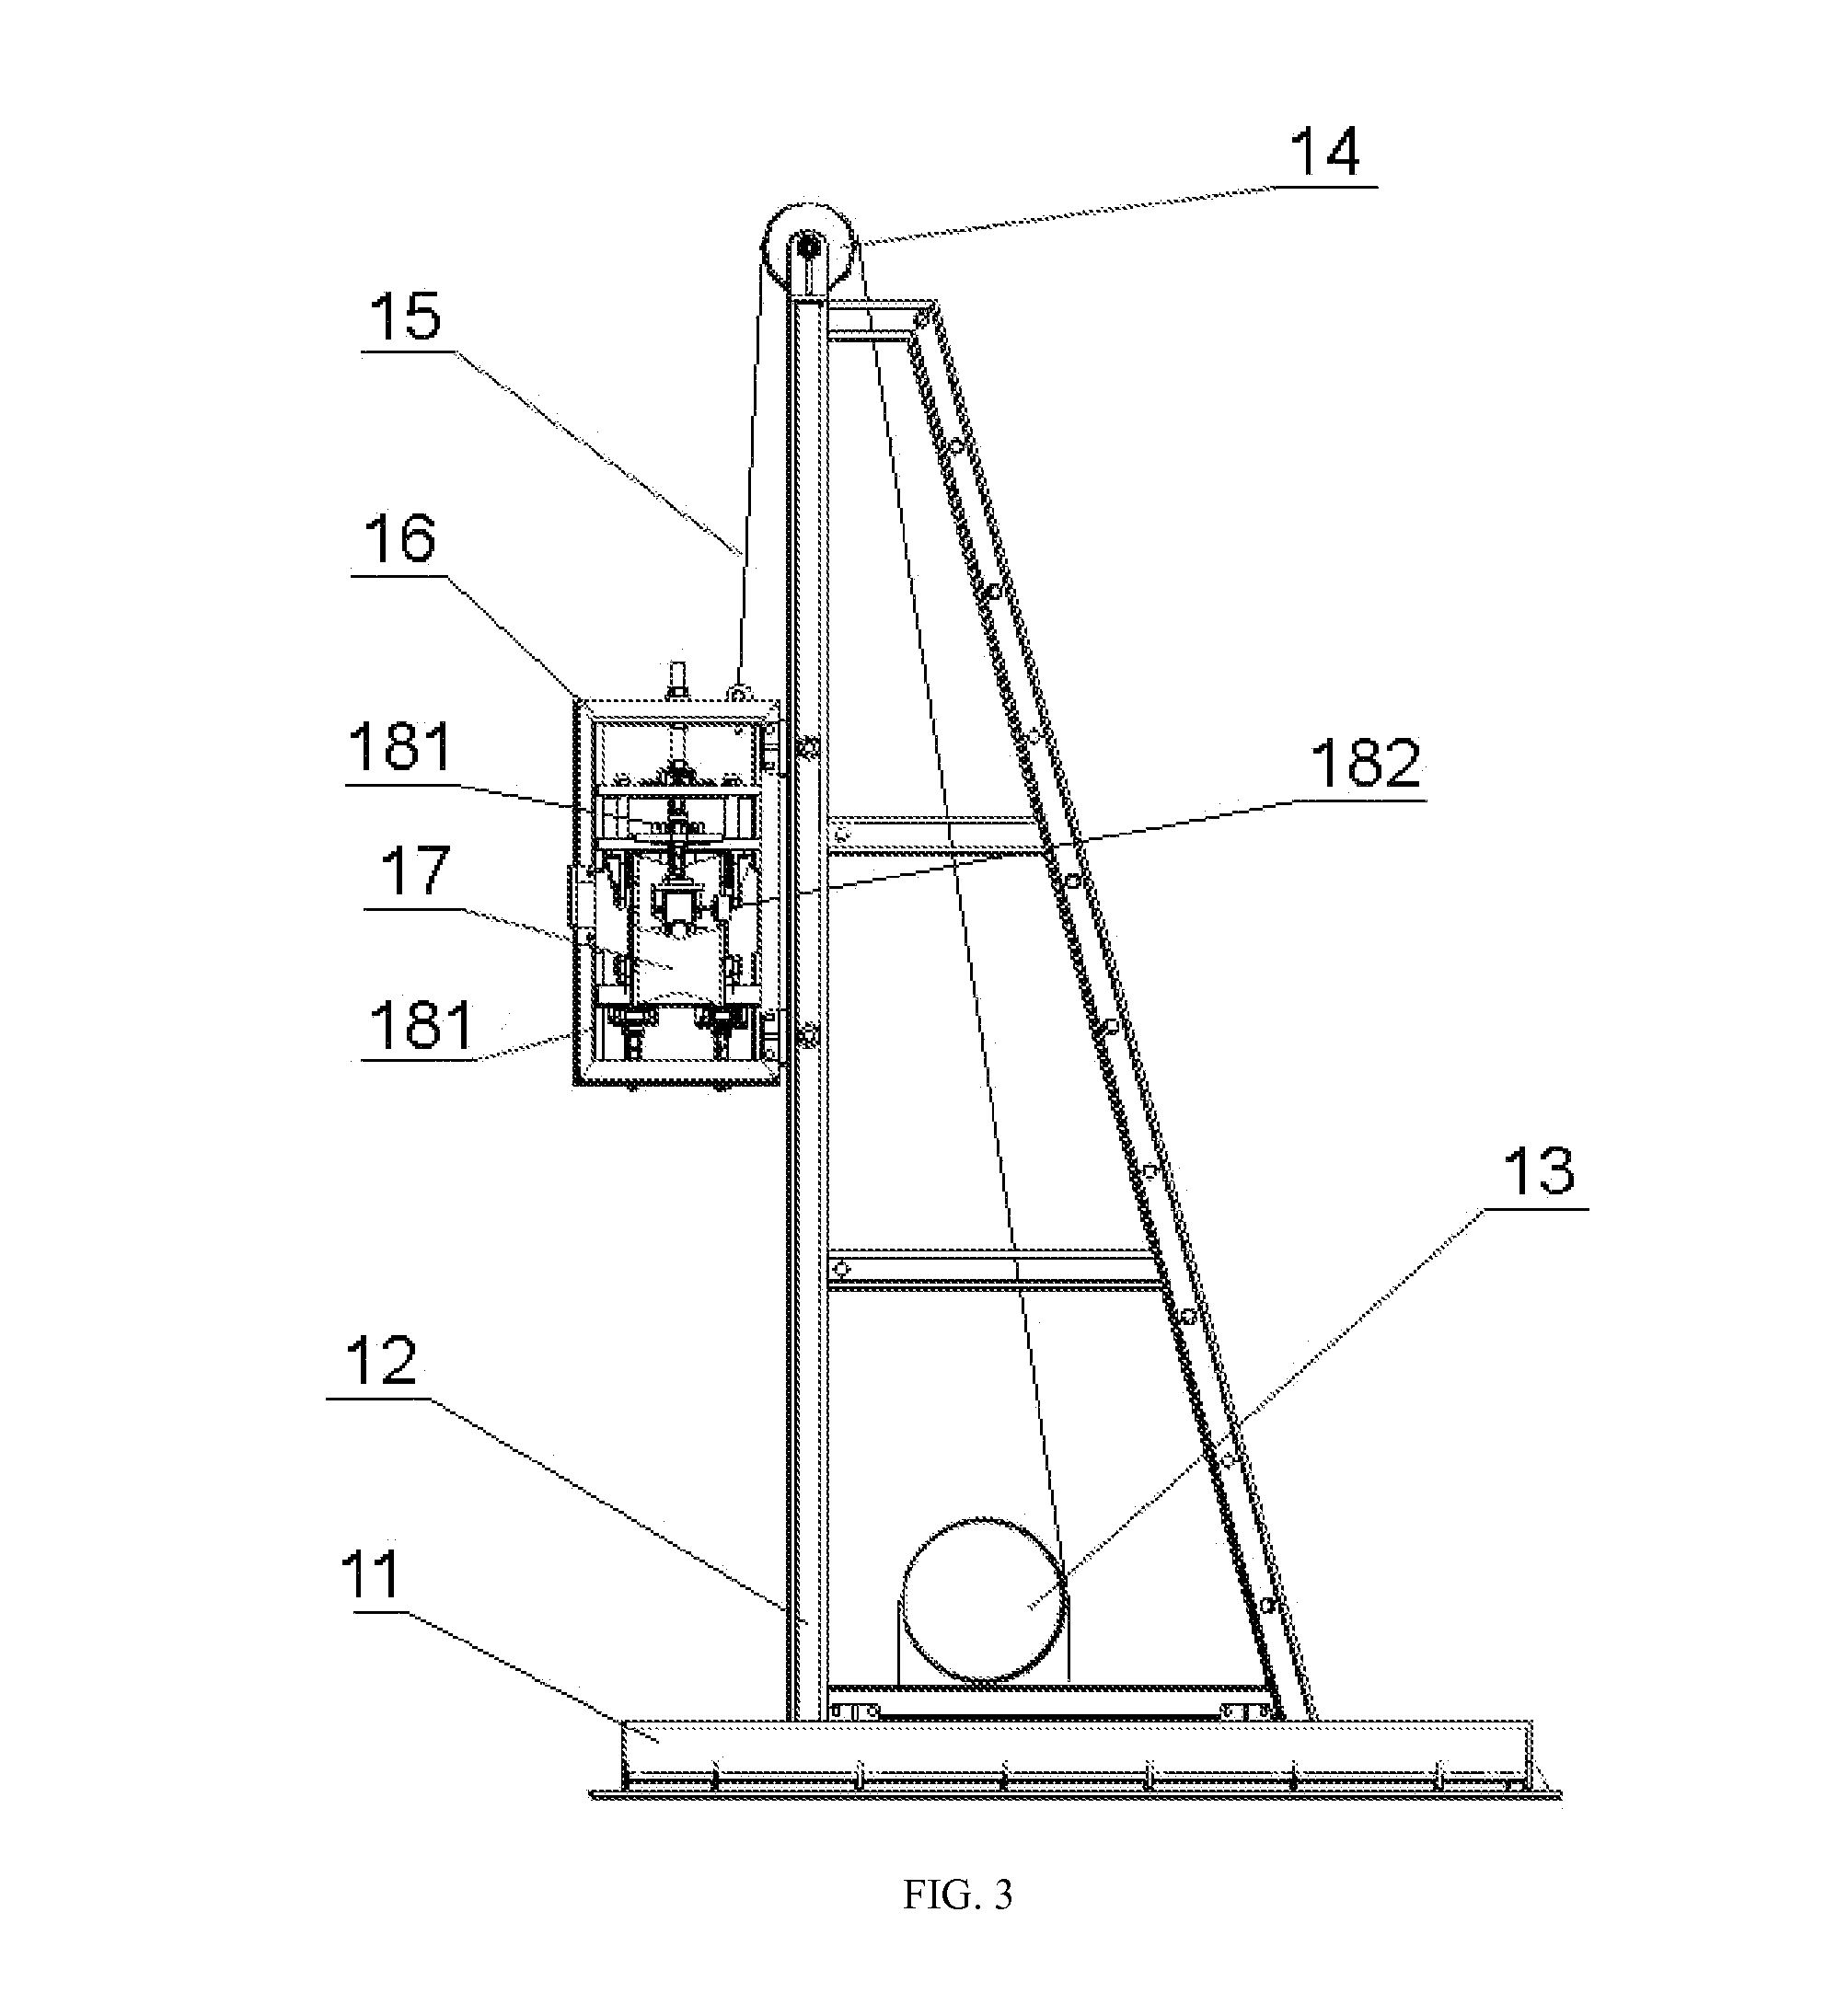 Method for Horizontally Winding and Unwinding a Parallel Wire Strand